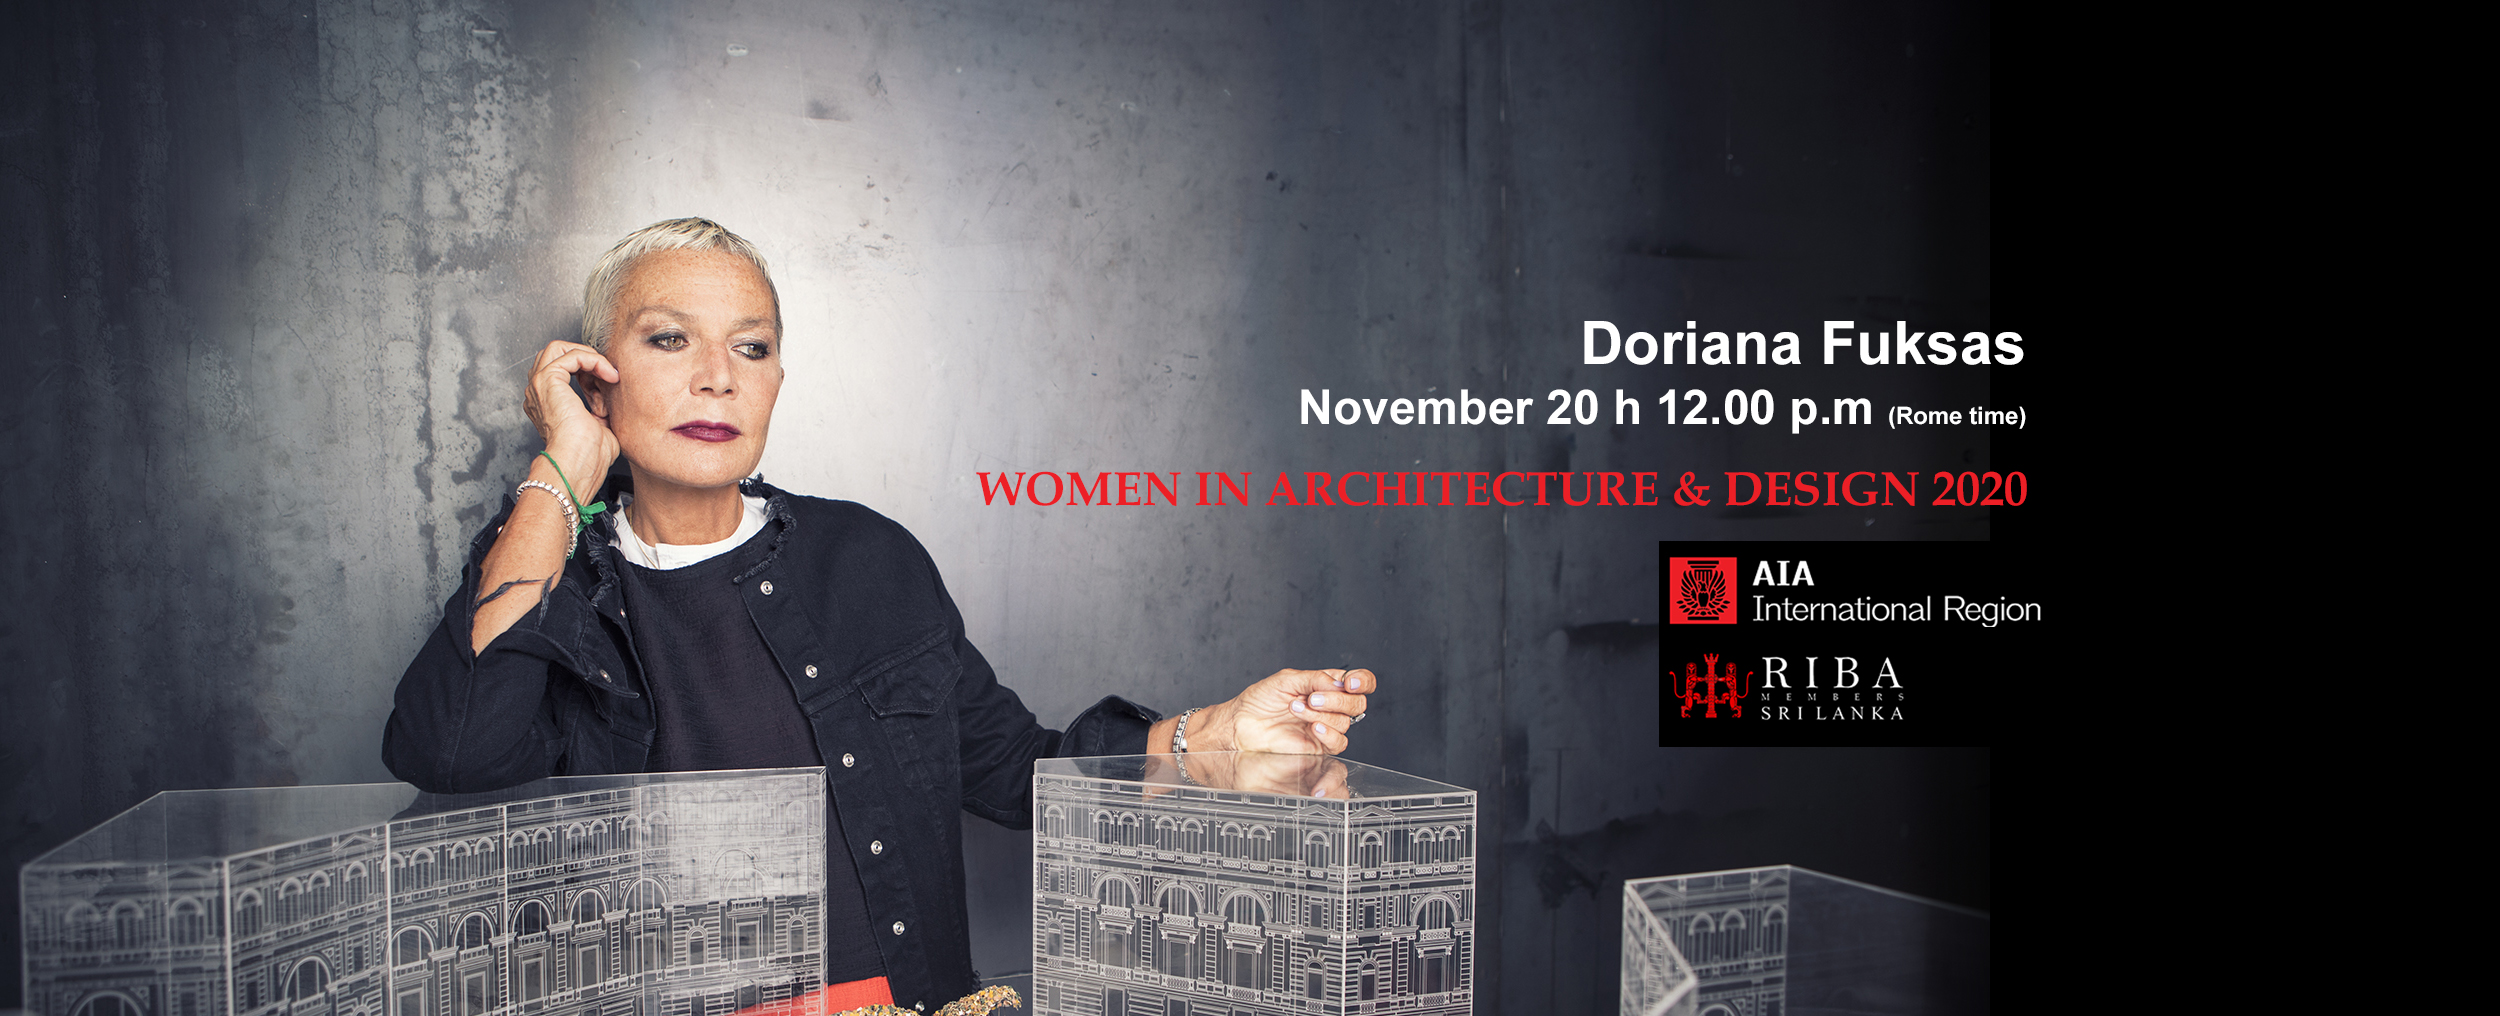 Doriana Fuksas as a speaker at “Women in Architecture and Design 2020”. AIA International Region Virtual Conference “Catalyzing Change”2020, November 20